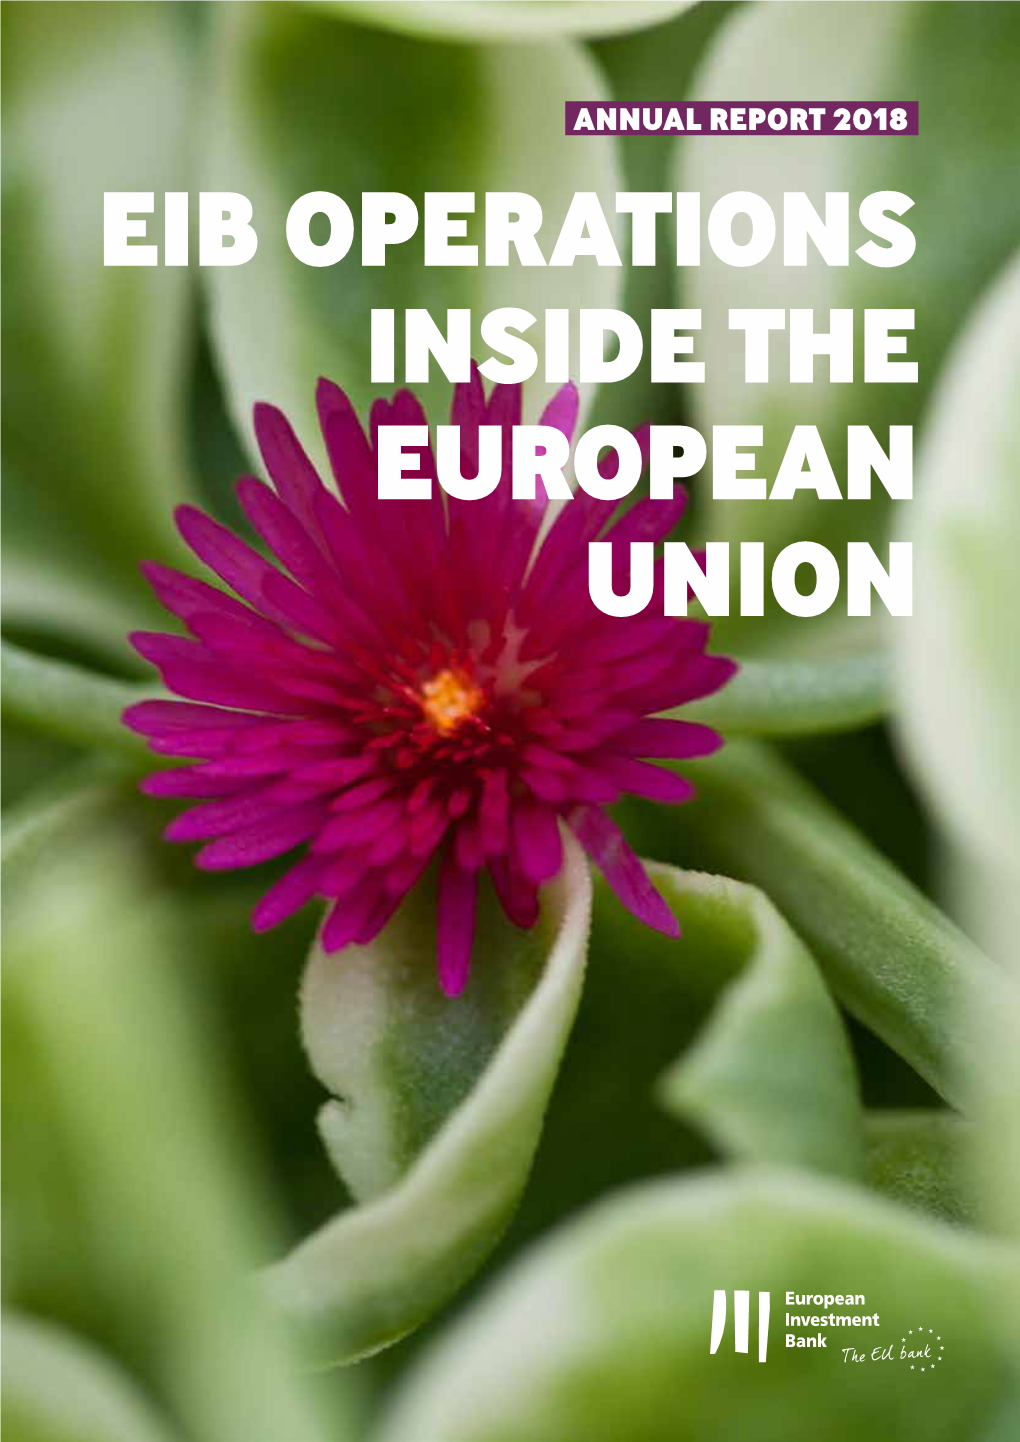 2018 Annual Report on Its Operations Inside the EU